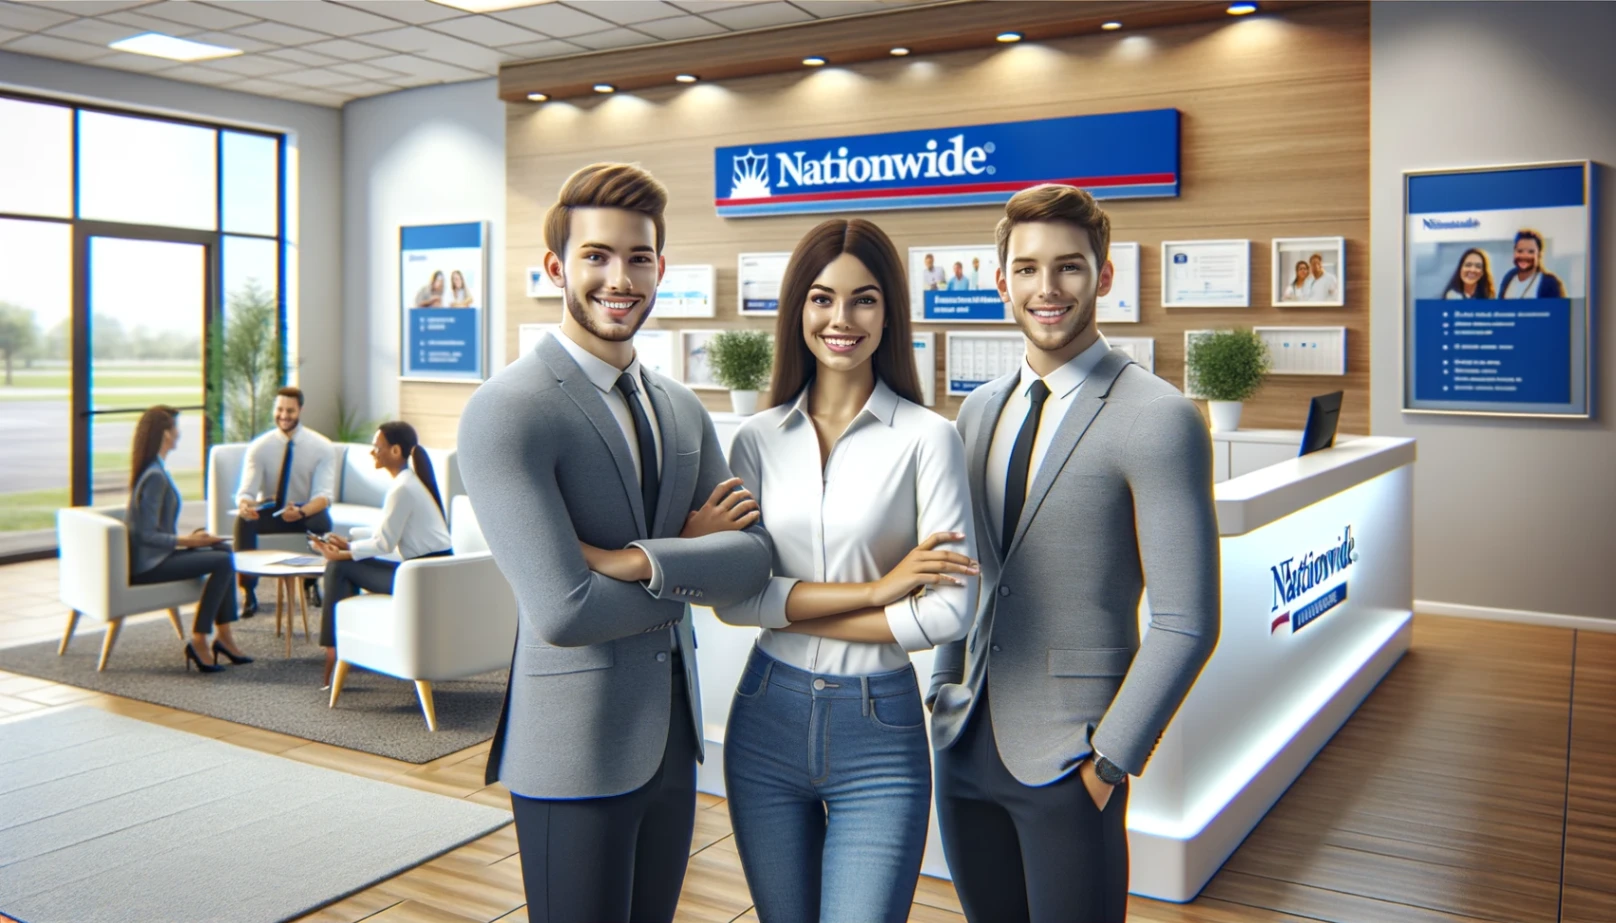 Nationwide Company: Learn How to Apply for Vacancies